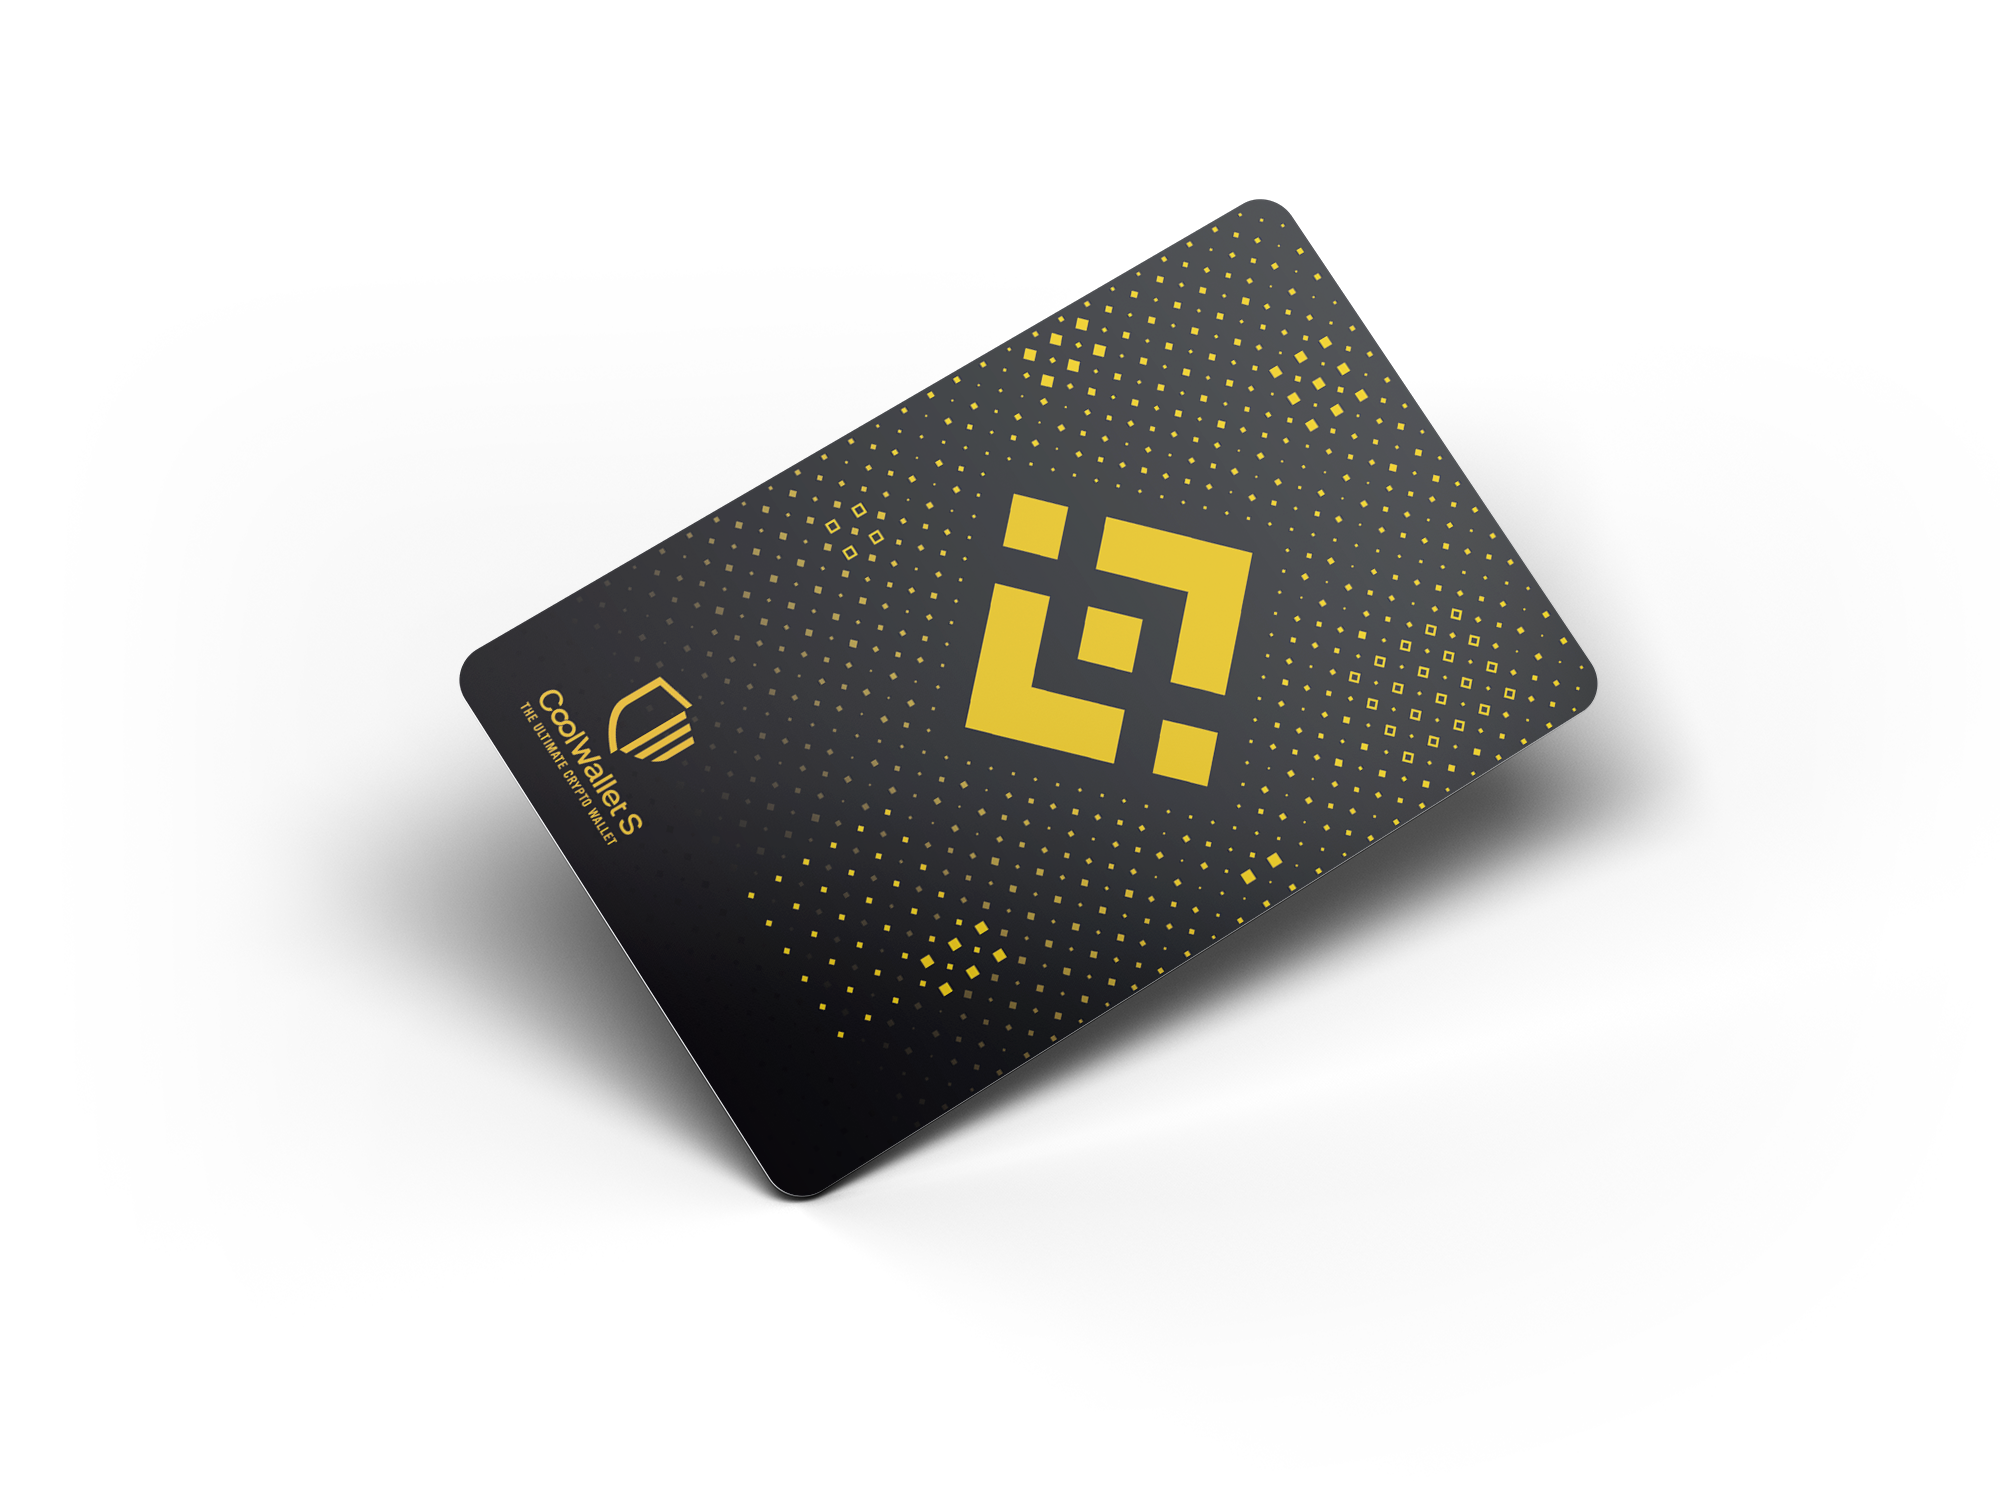 CoolWallet S x Binance-chain - CoolWallet S